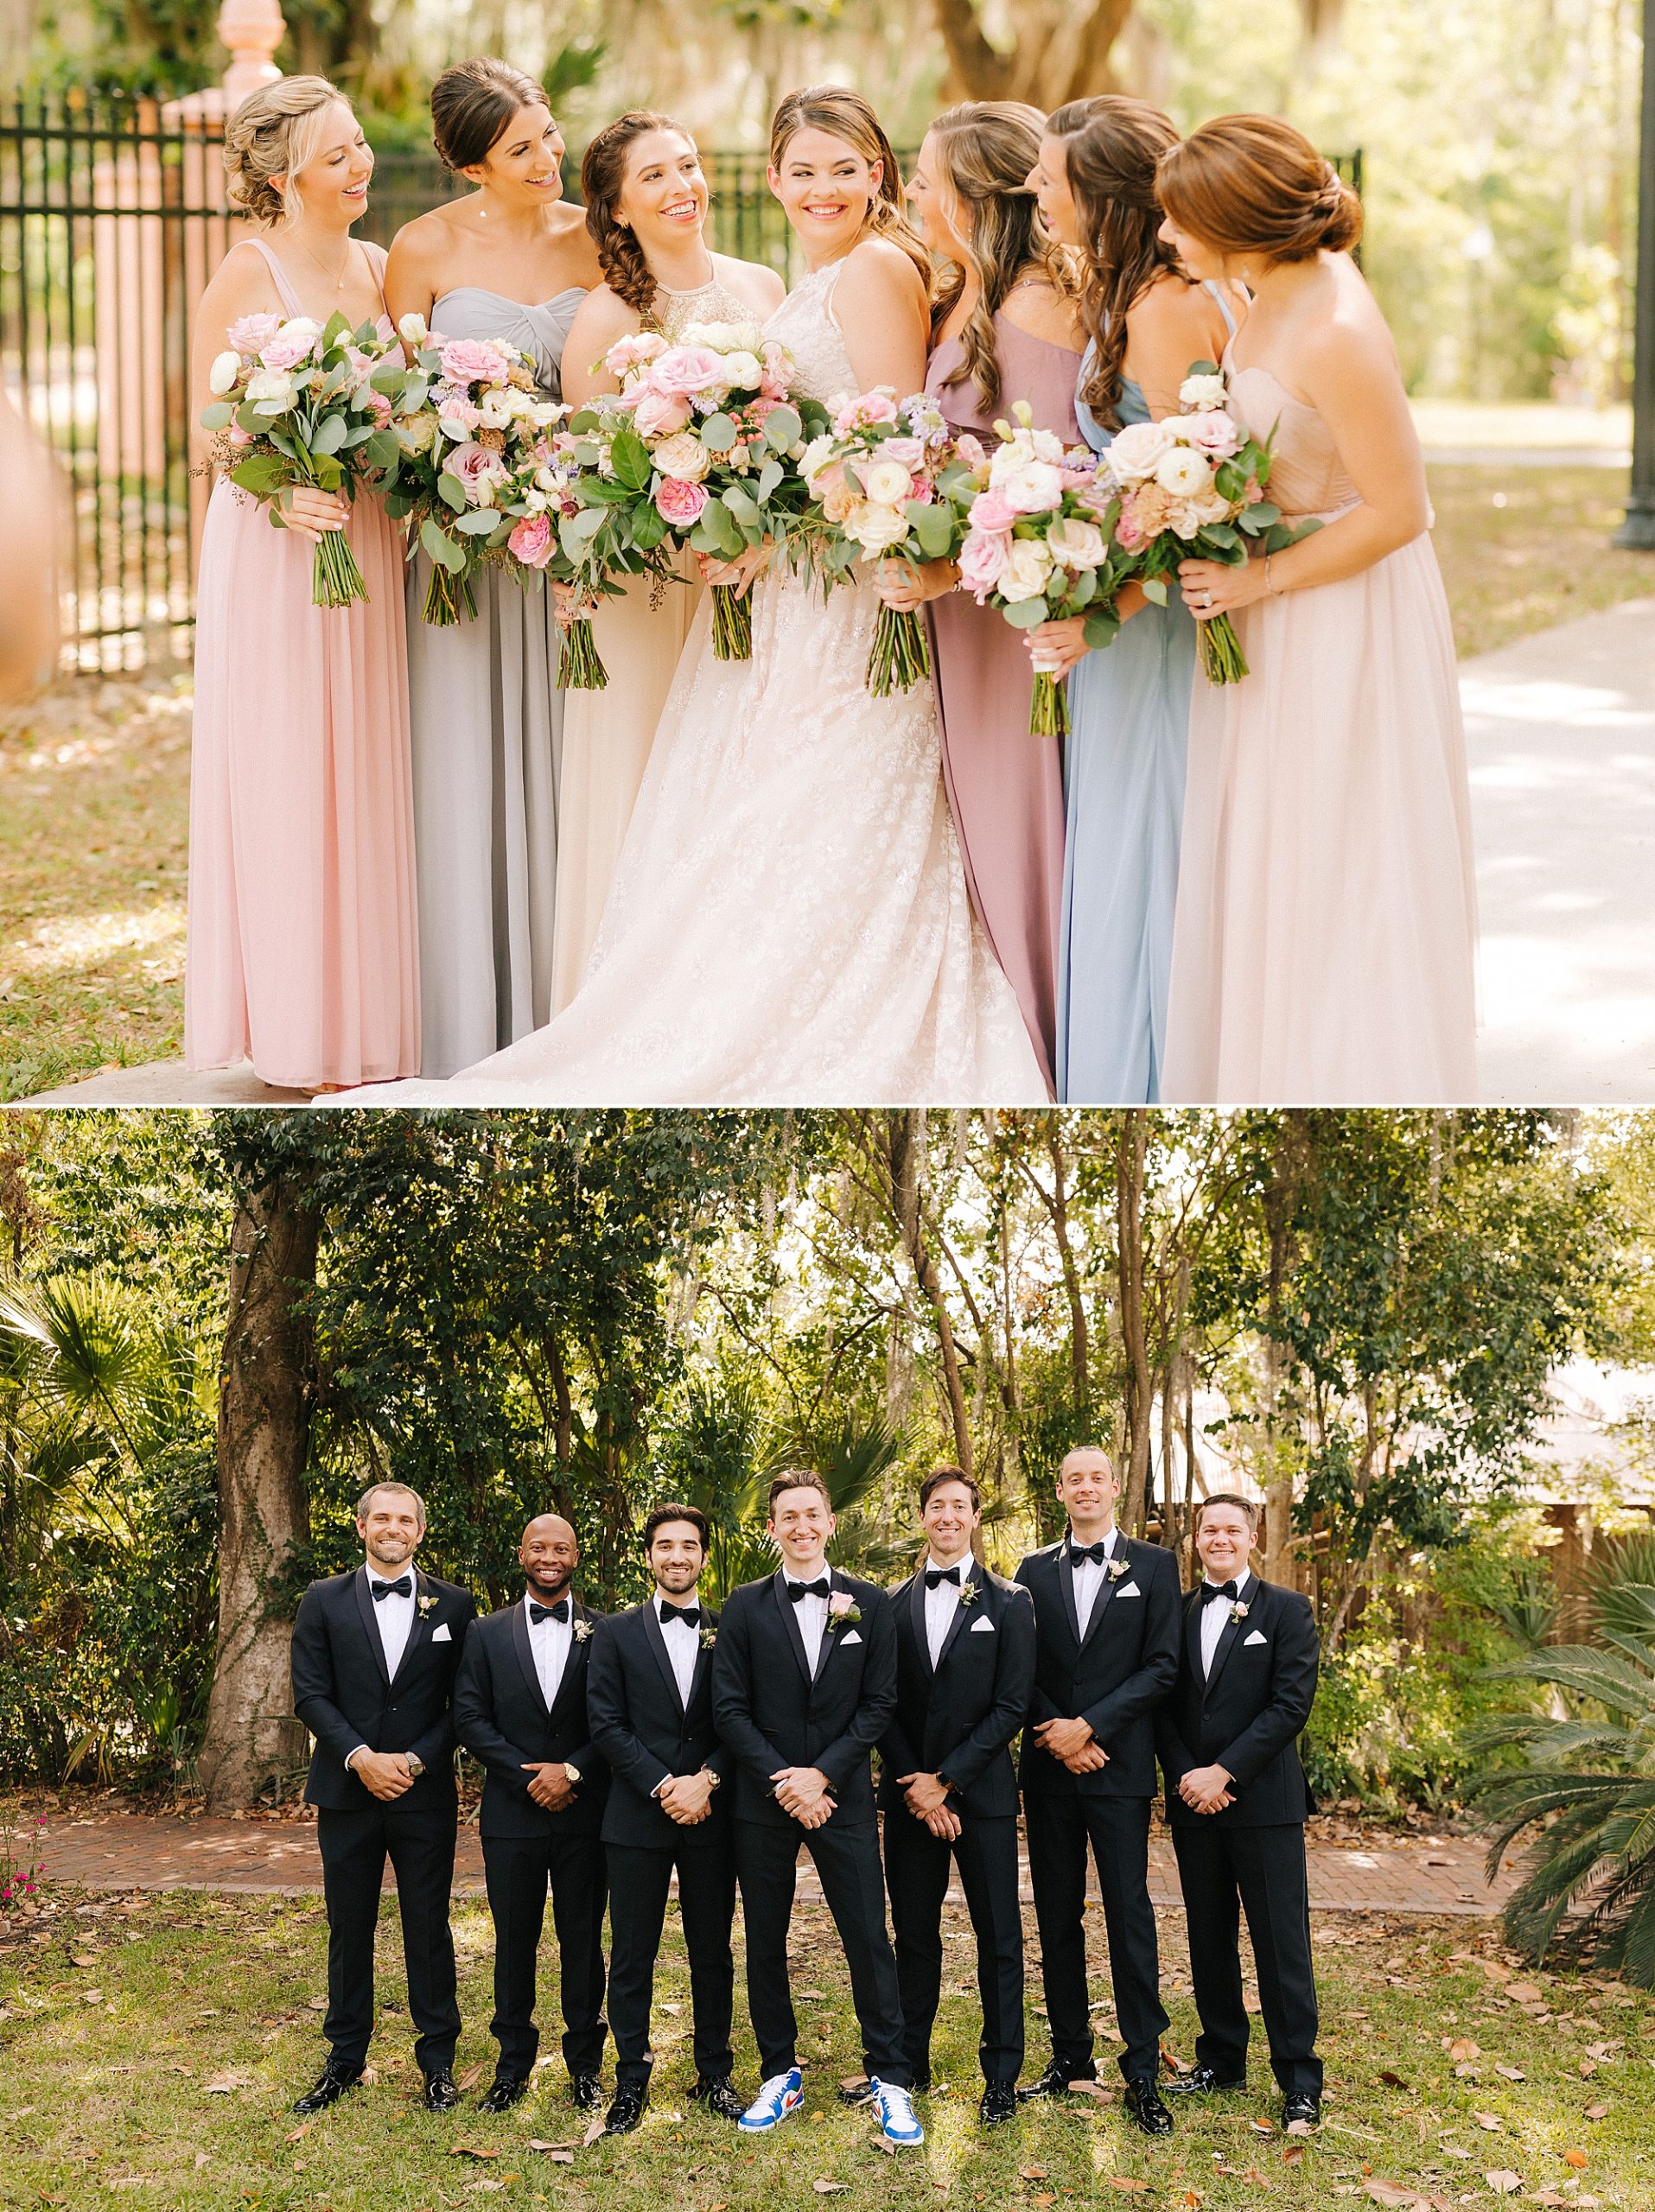 wedding party poses in Gainesville FL park